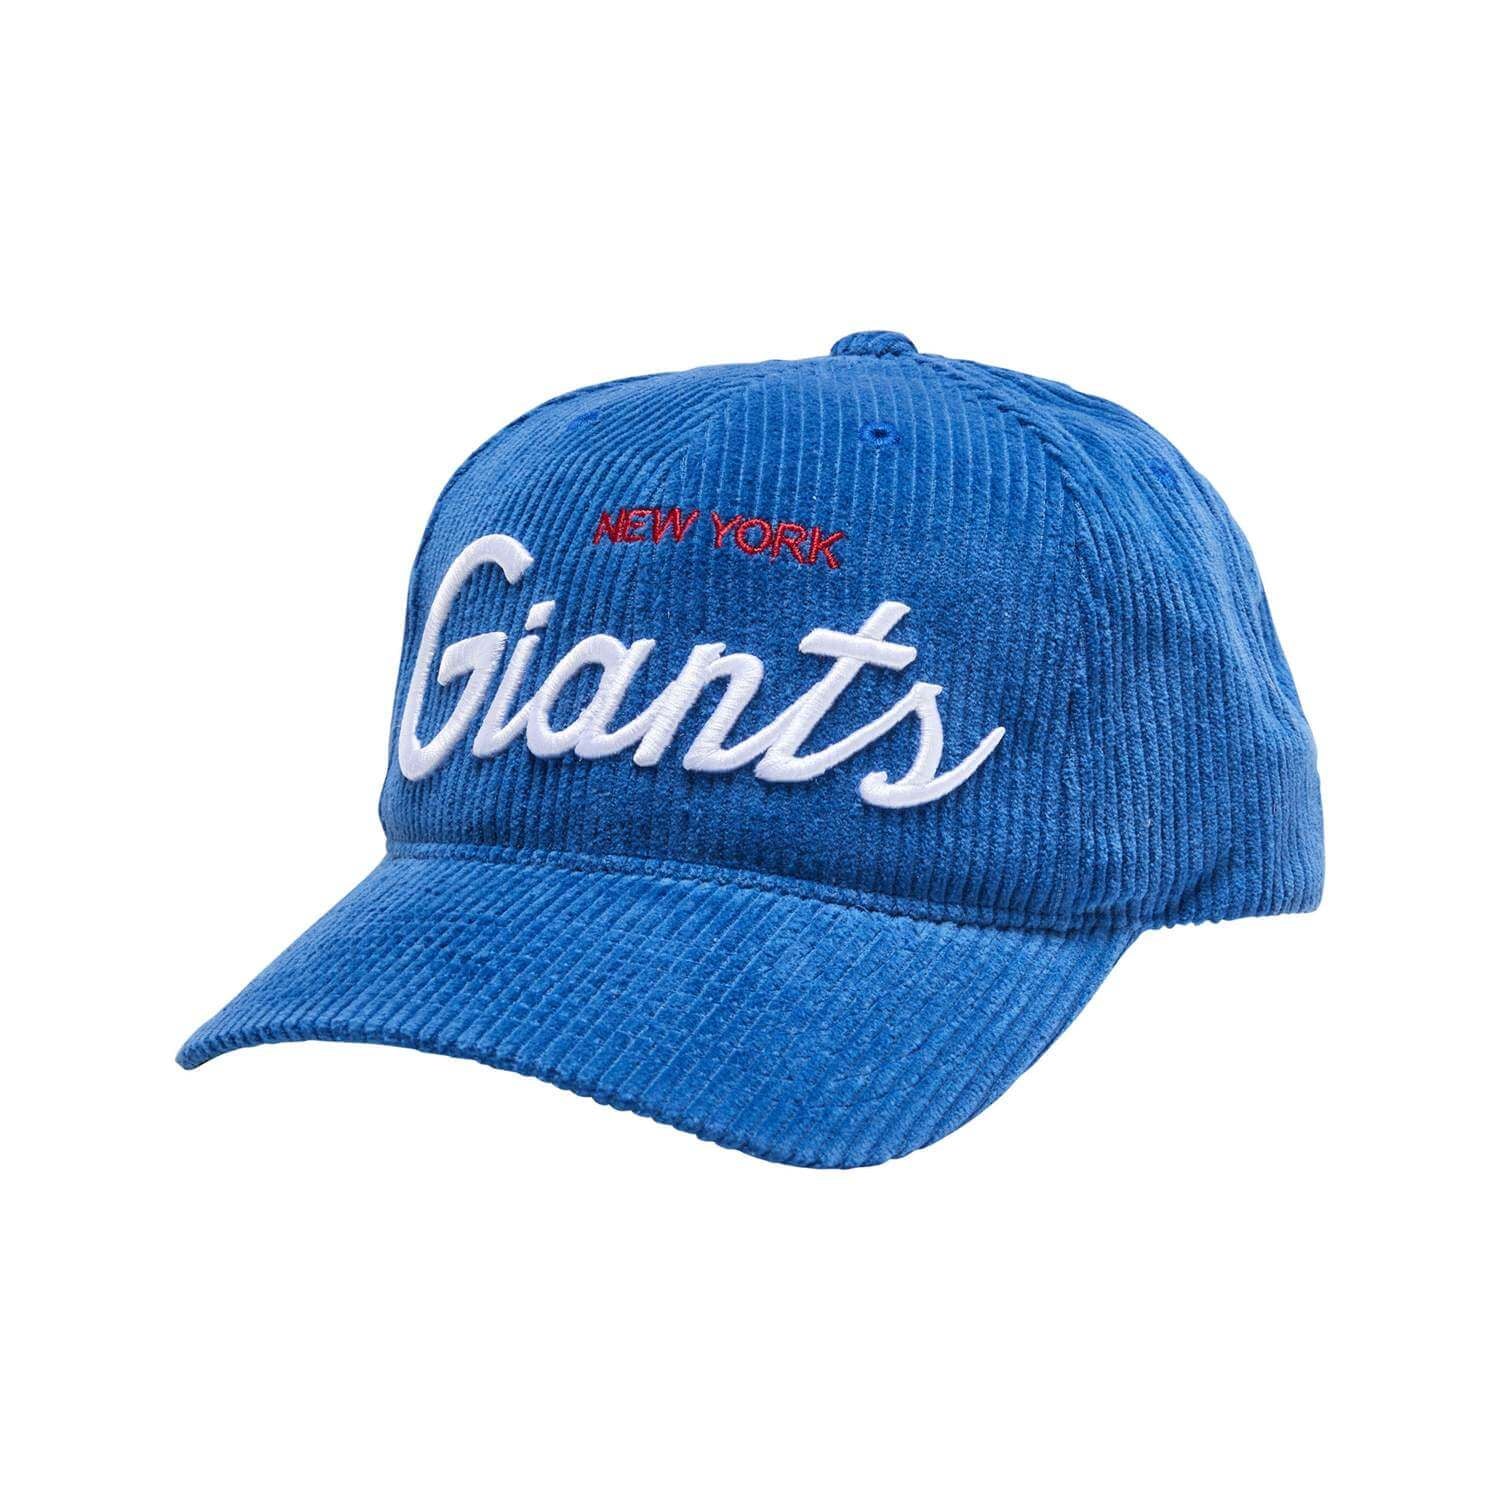 MITCHELL & NESS - NEW YORK GIANTS MONTAGE DEADSTOCK SNAPBACK - Royal